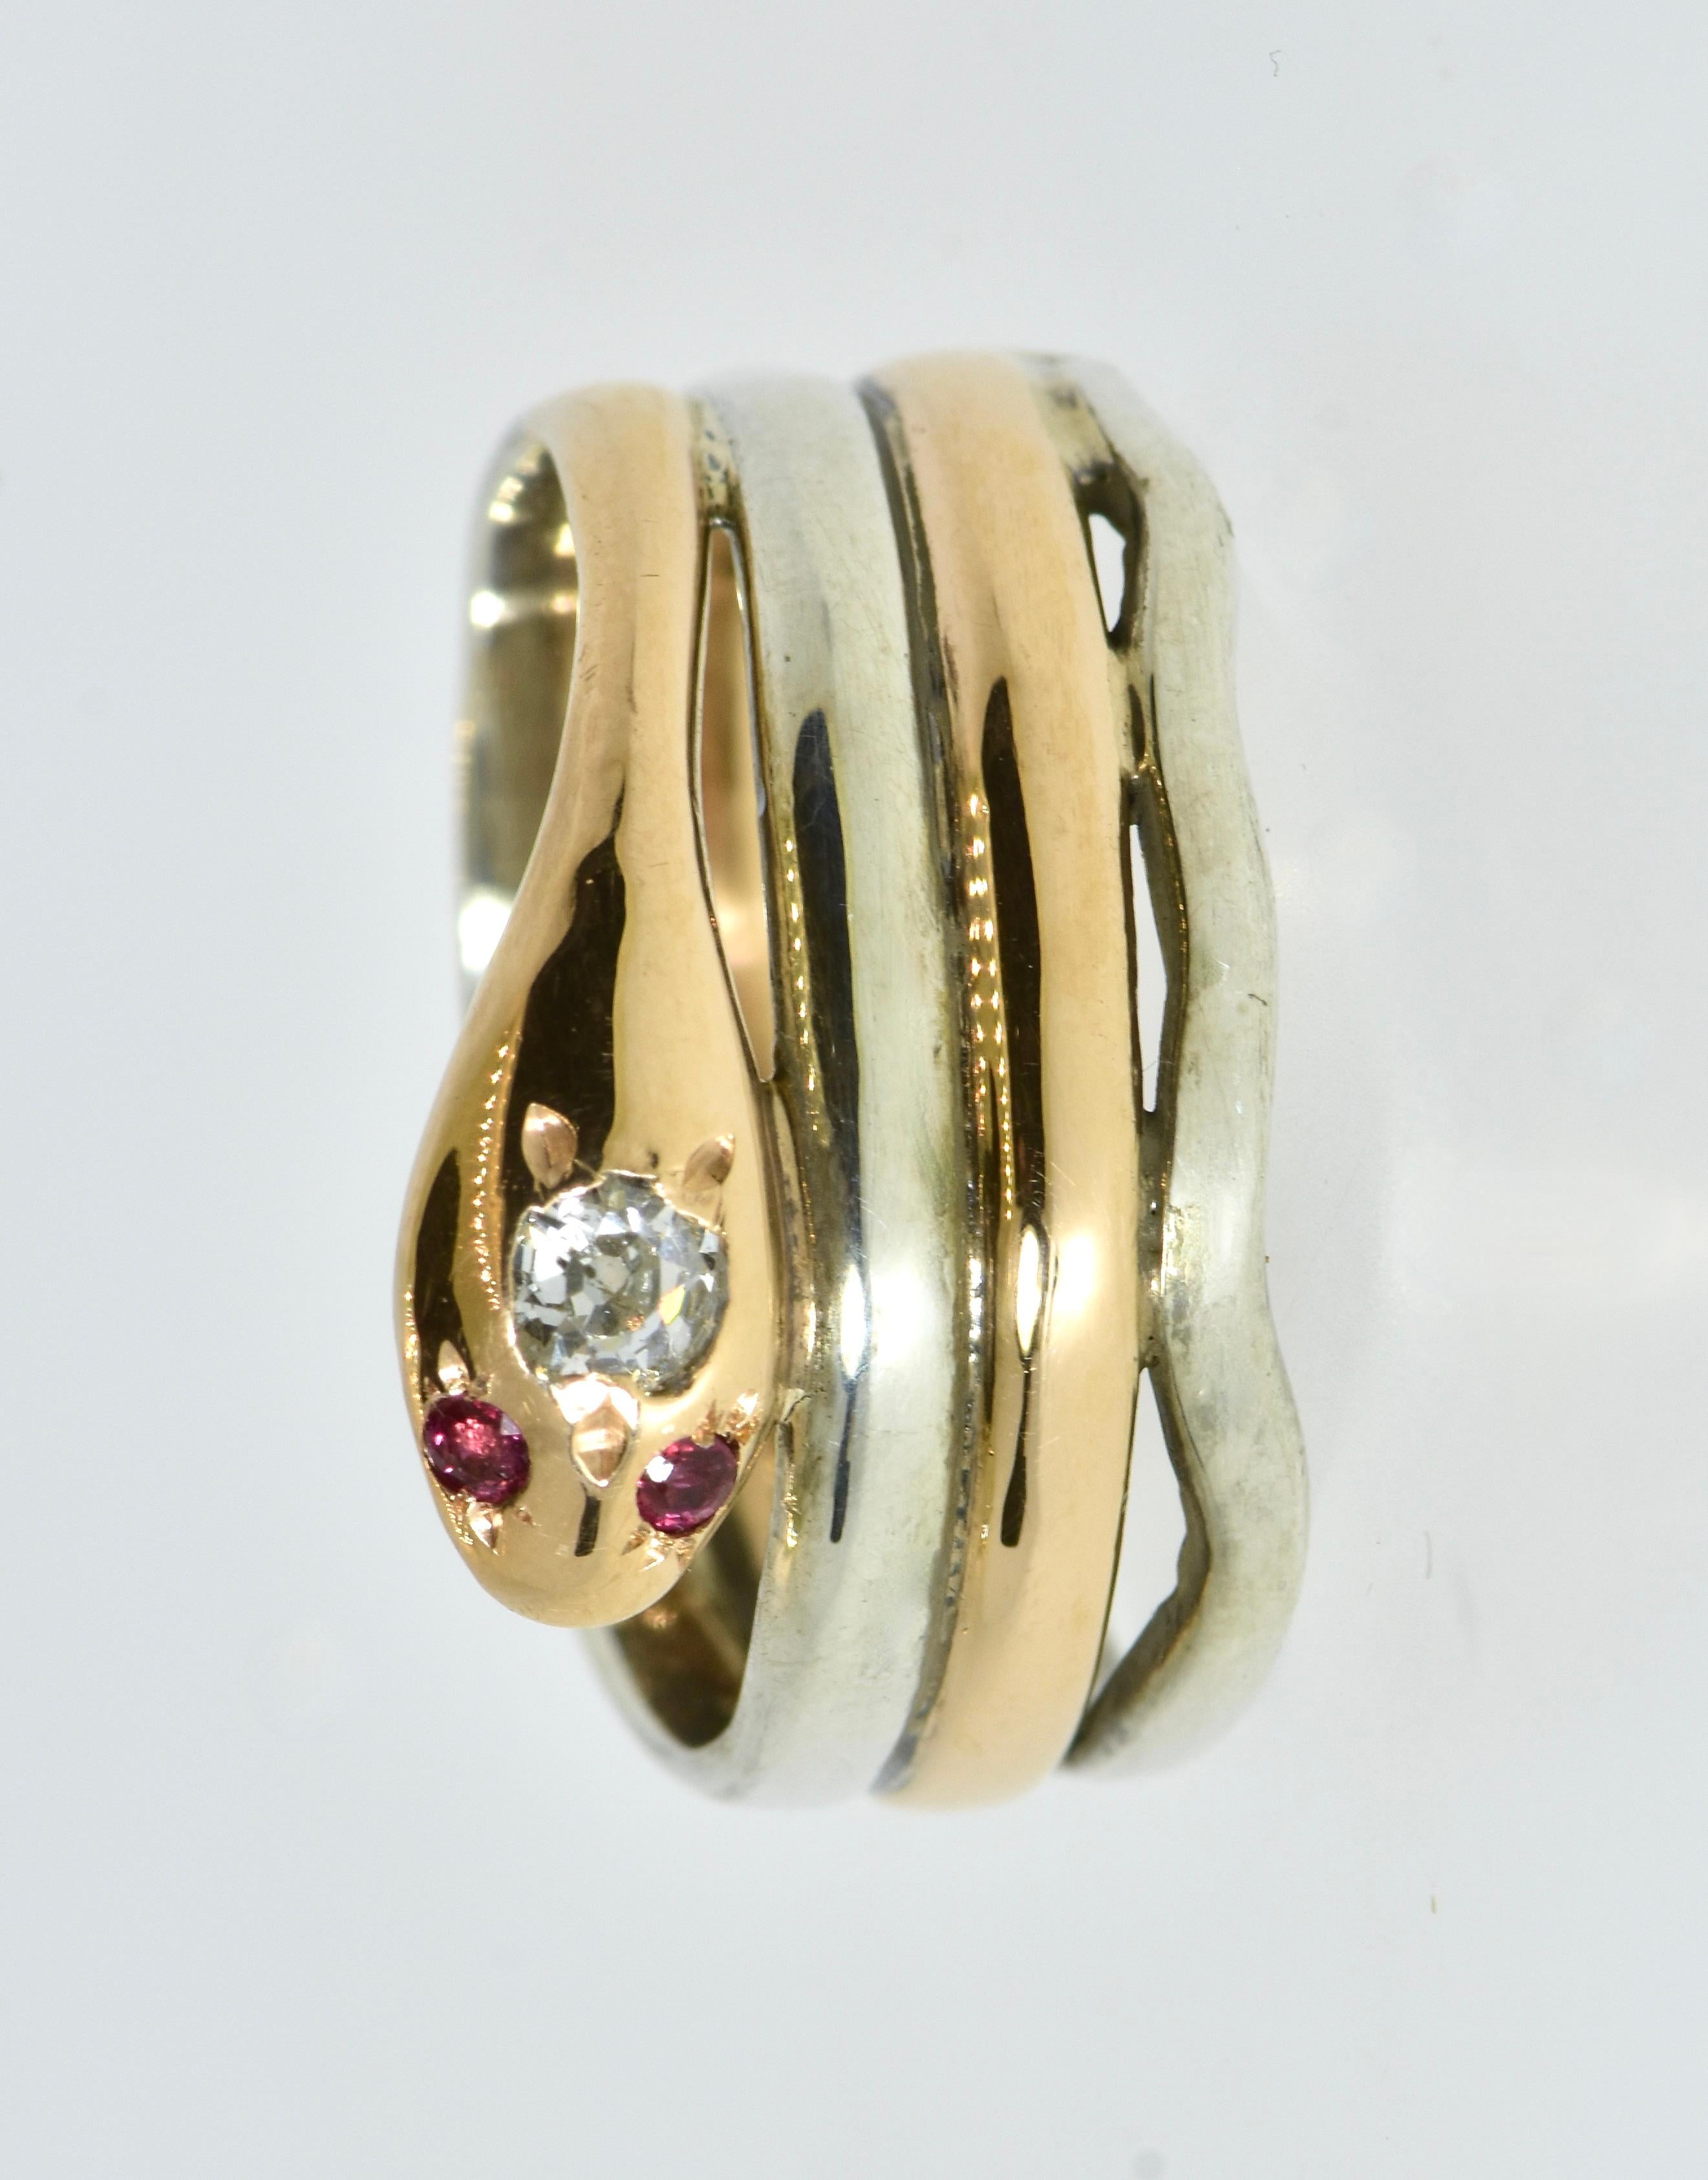 Antique Snake Ring with a Mine Cut Diamond  &  Burma Rubies, c. 1890, American In Excellent Condition For Sale In Aspen, CO